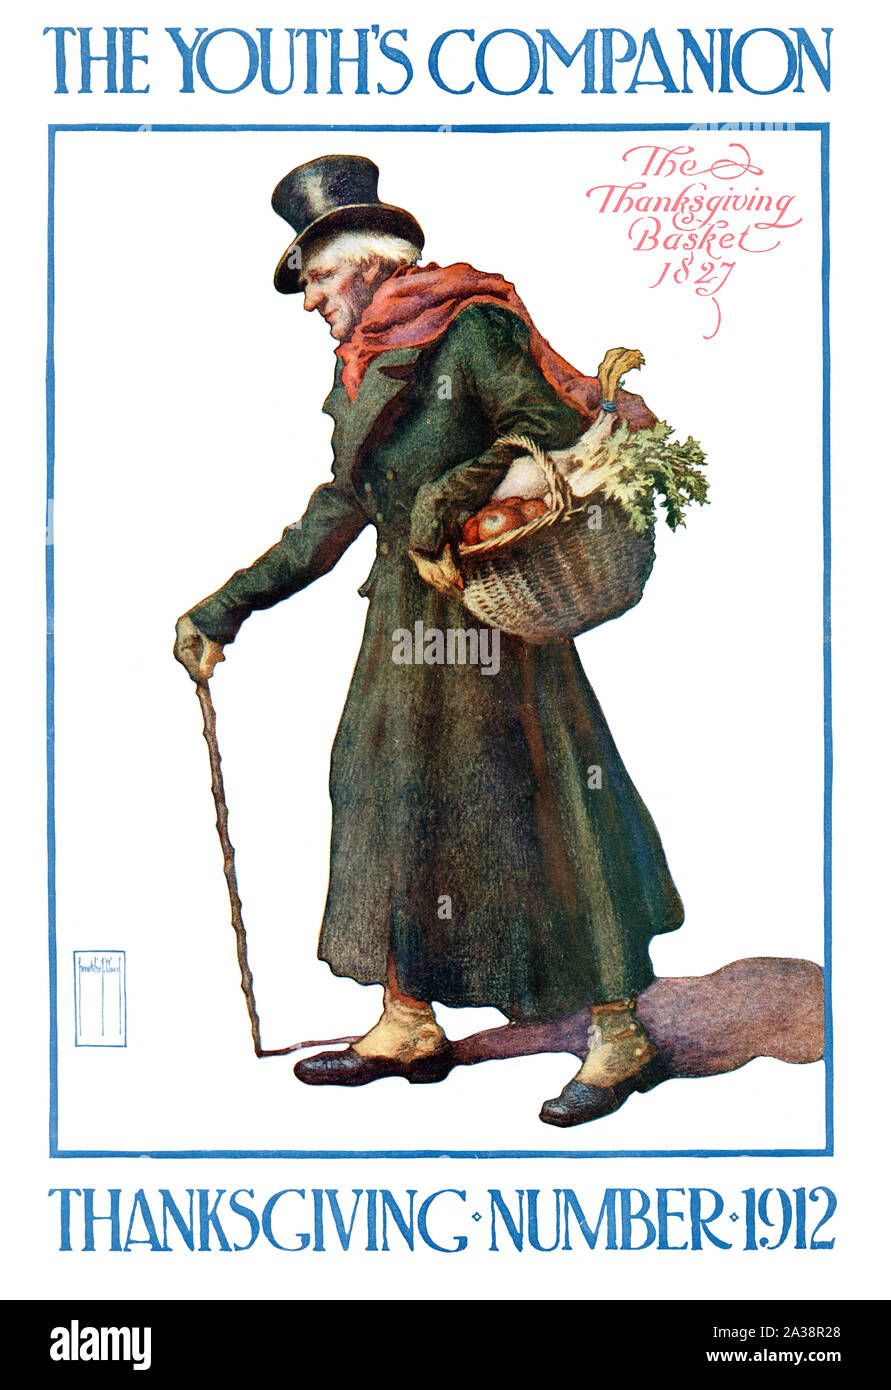 The thanksgiving basket, vintage poster made from magazine cover of the Youth's Companion, 1912 Stock Photo